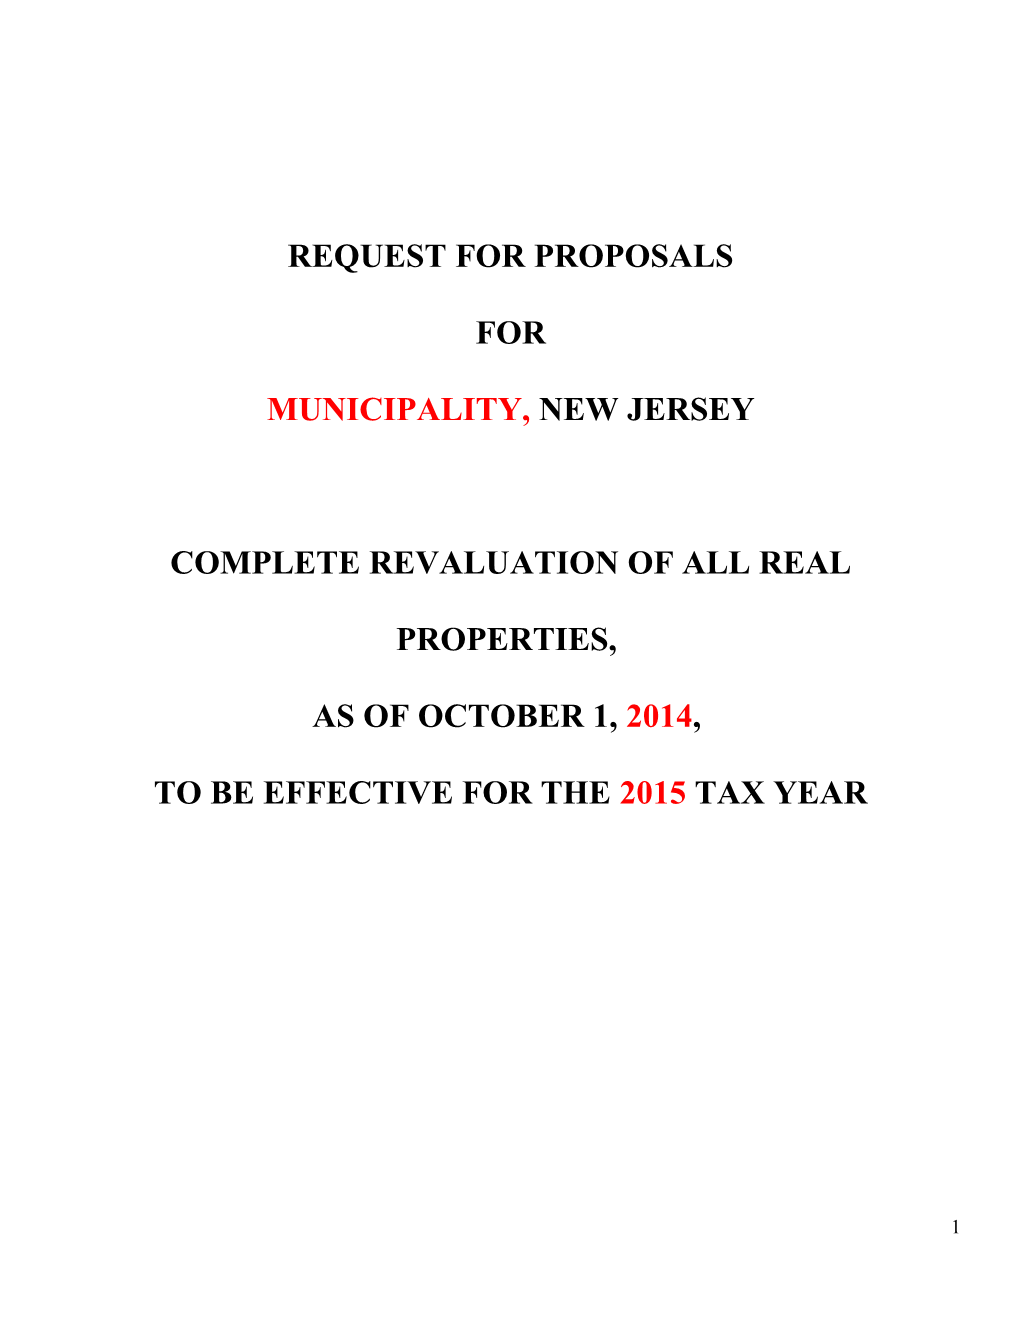 Request for Proposals s24